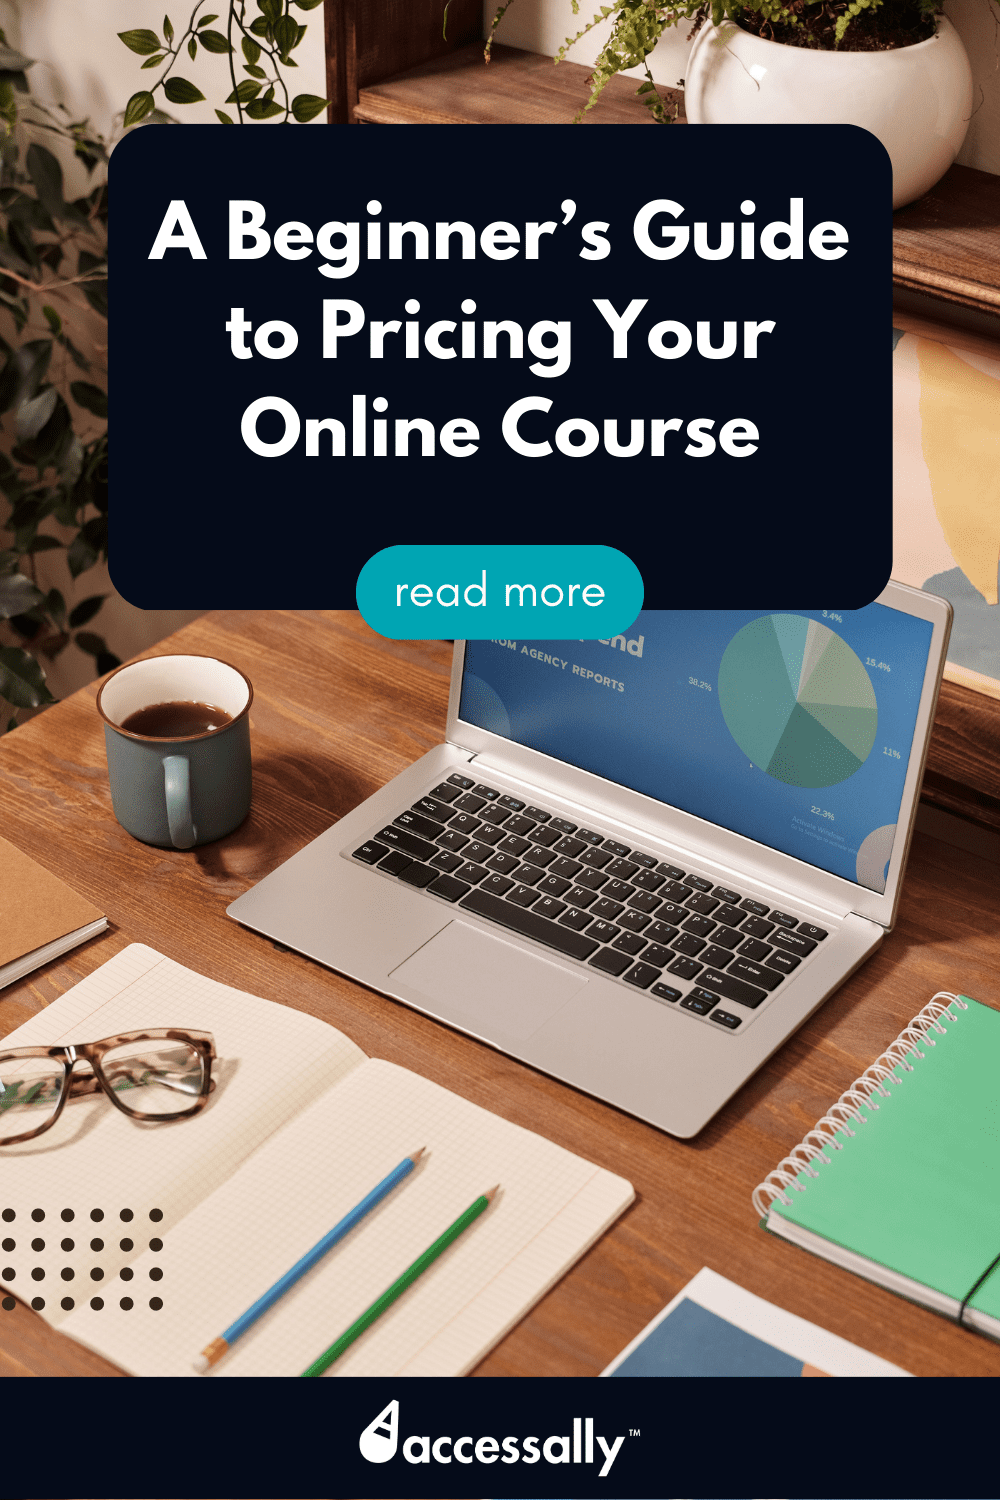 A beginner's guide to pricing your online course - laptop image